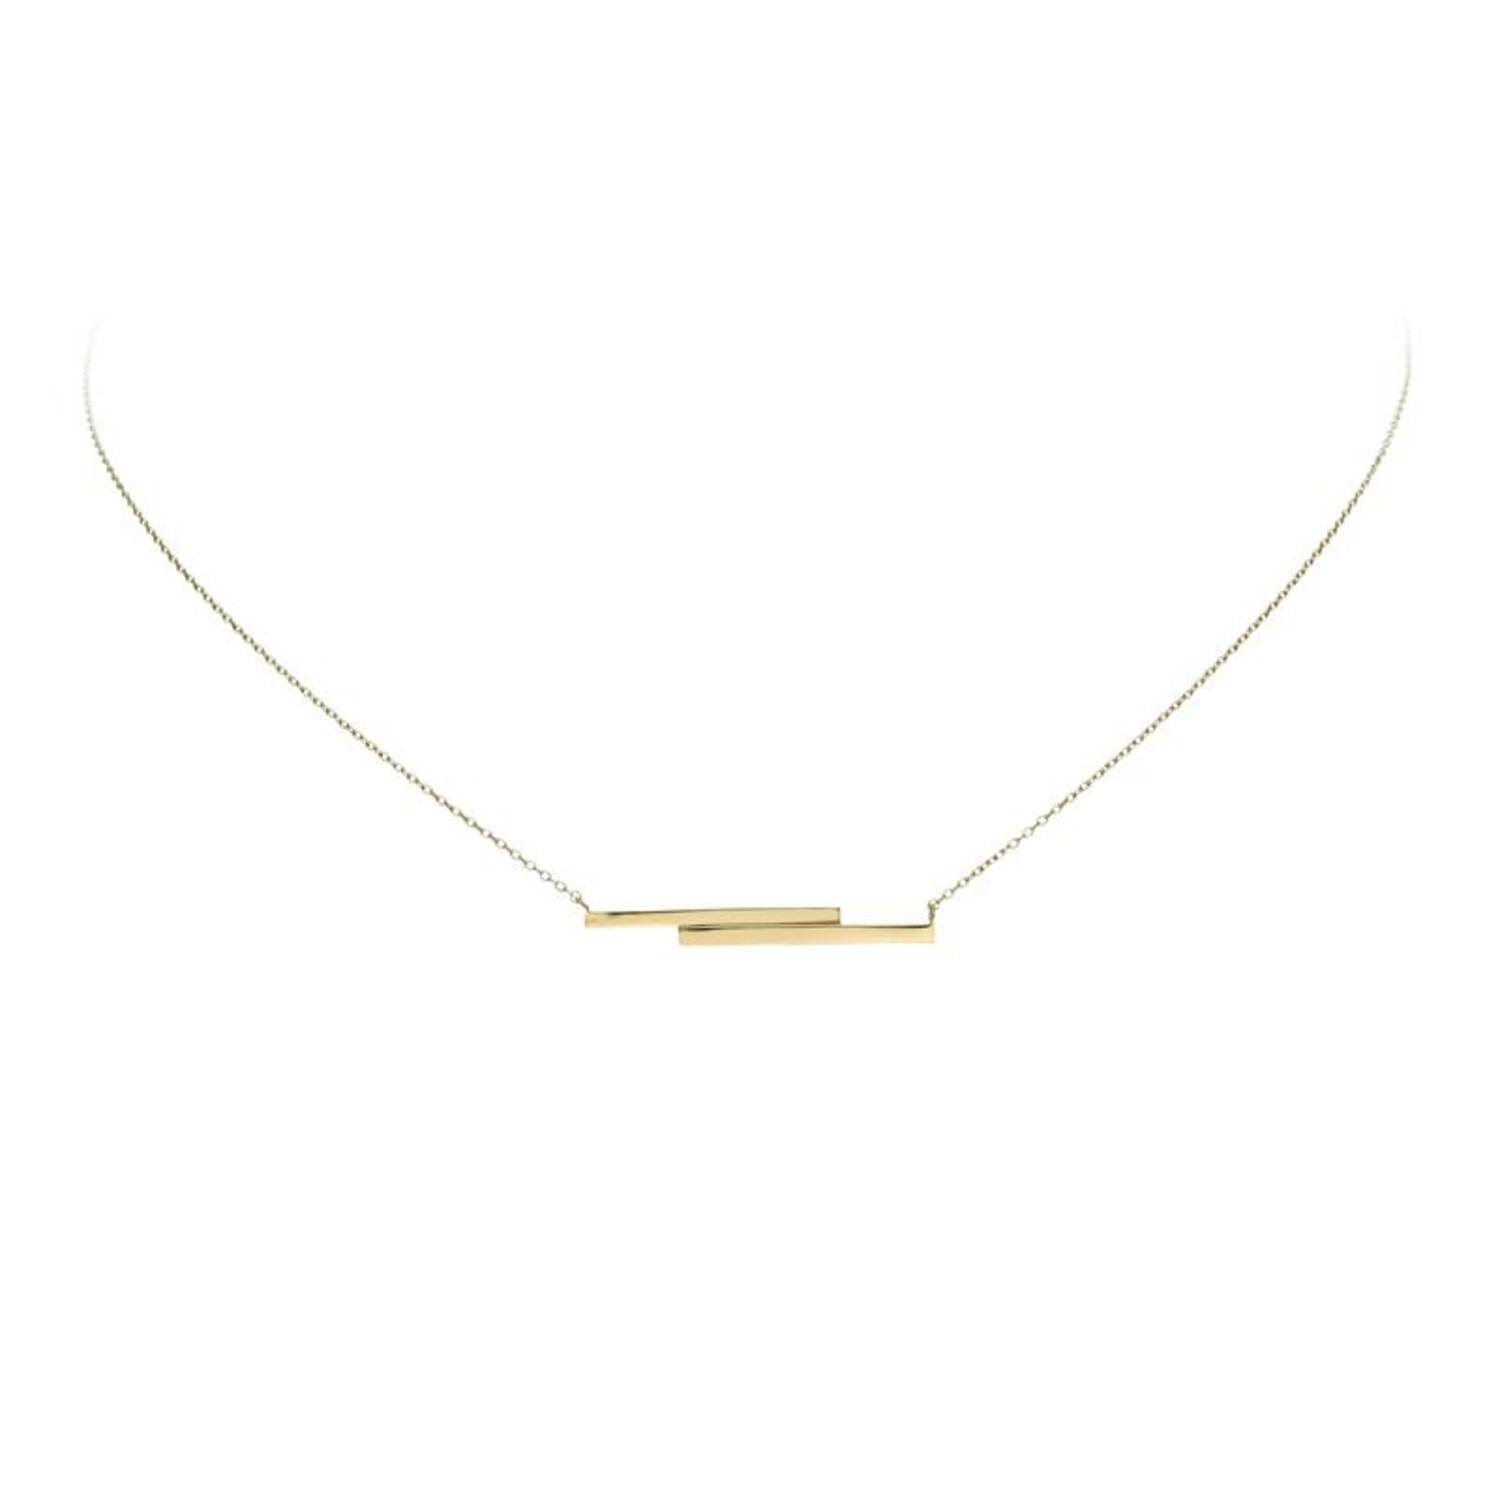  Collier - Dubbel staafje - Anker - Goud - 43cm